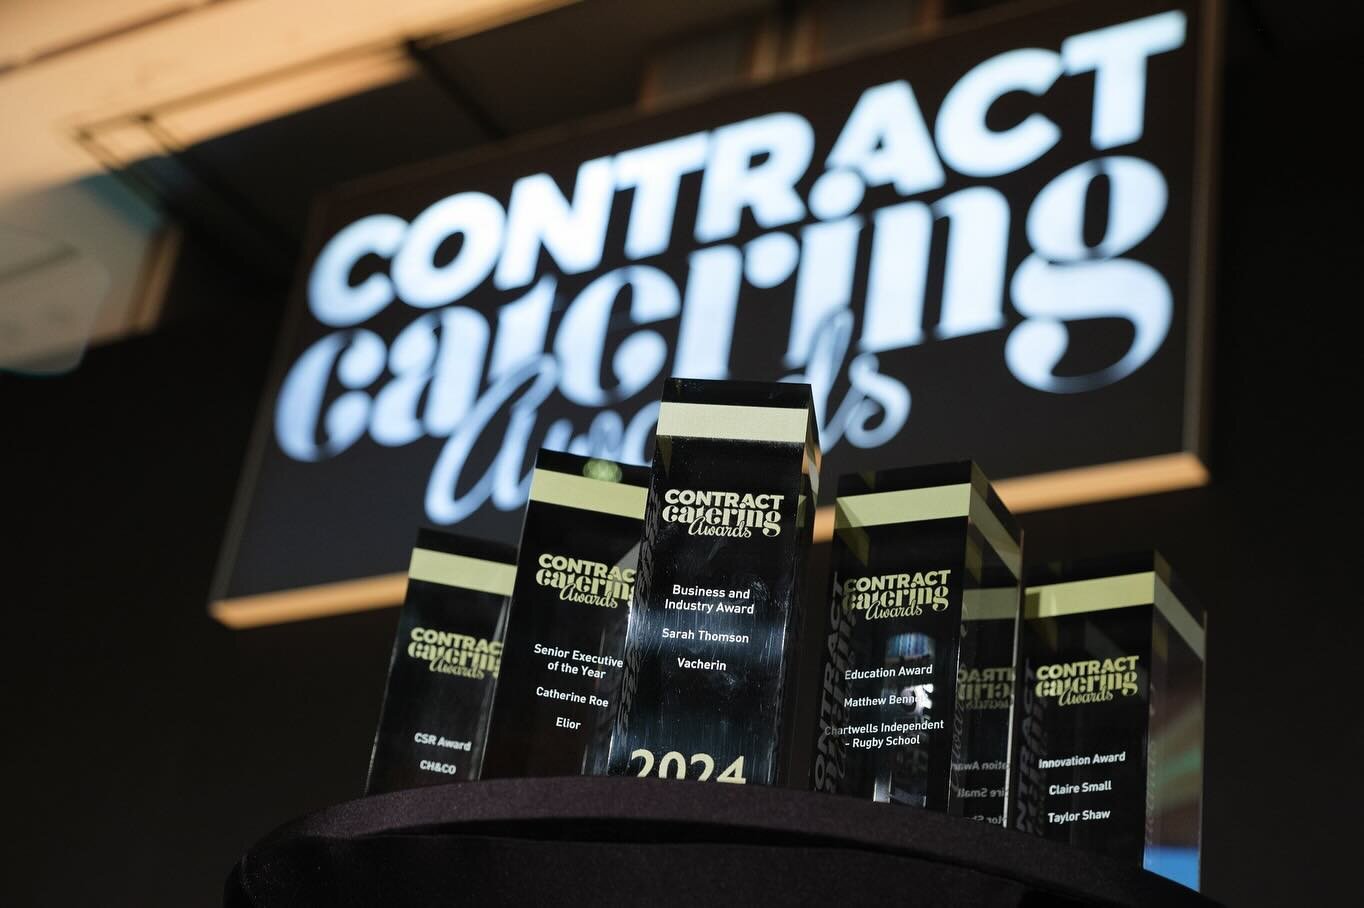 Bigger than ever before! The #ContractCateringAwards did not disappoint last night - a true celebration of everything to do with this wonderful industry. Congratulations to all finalists and winners!

Head to @contractcateringmag for the full story ?